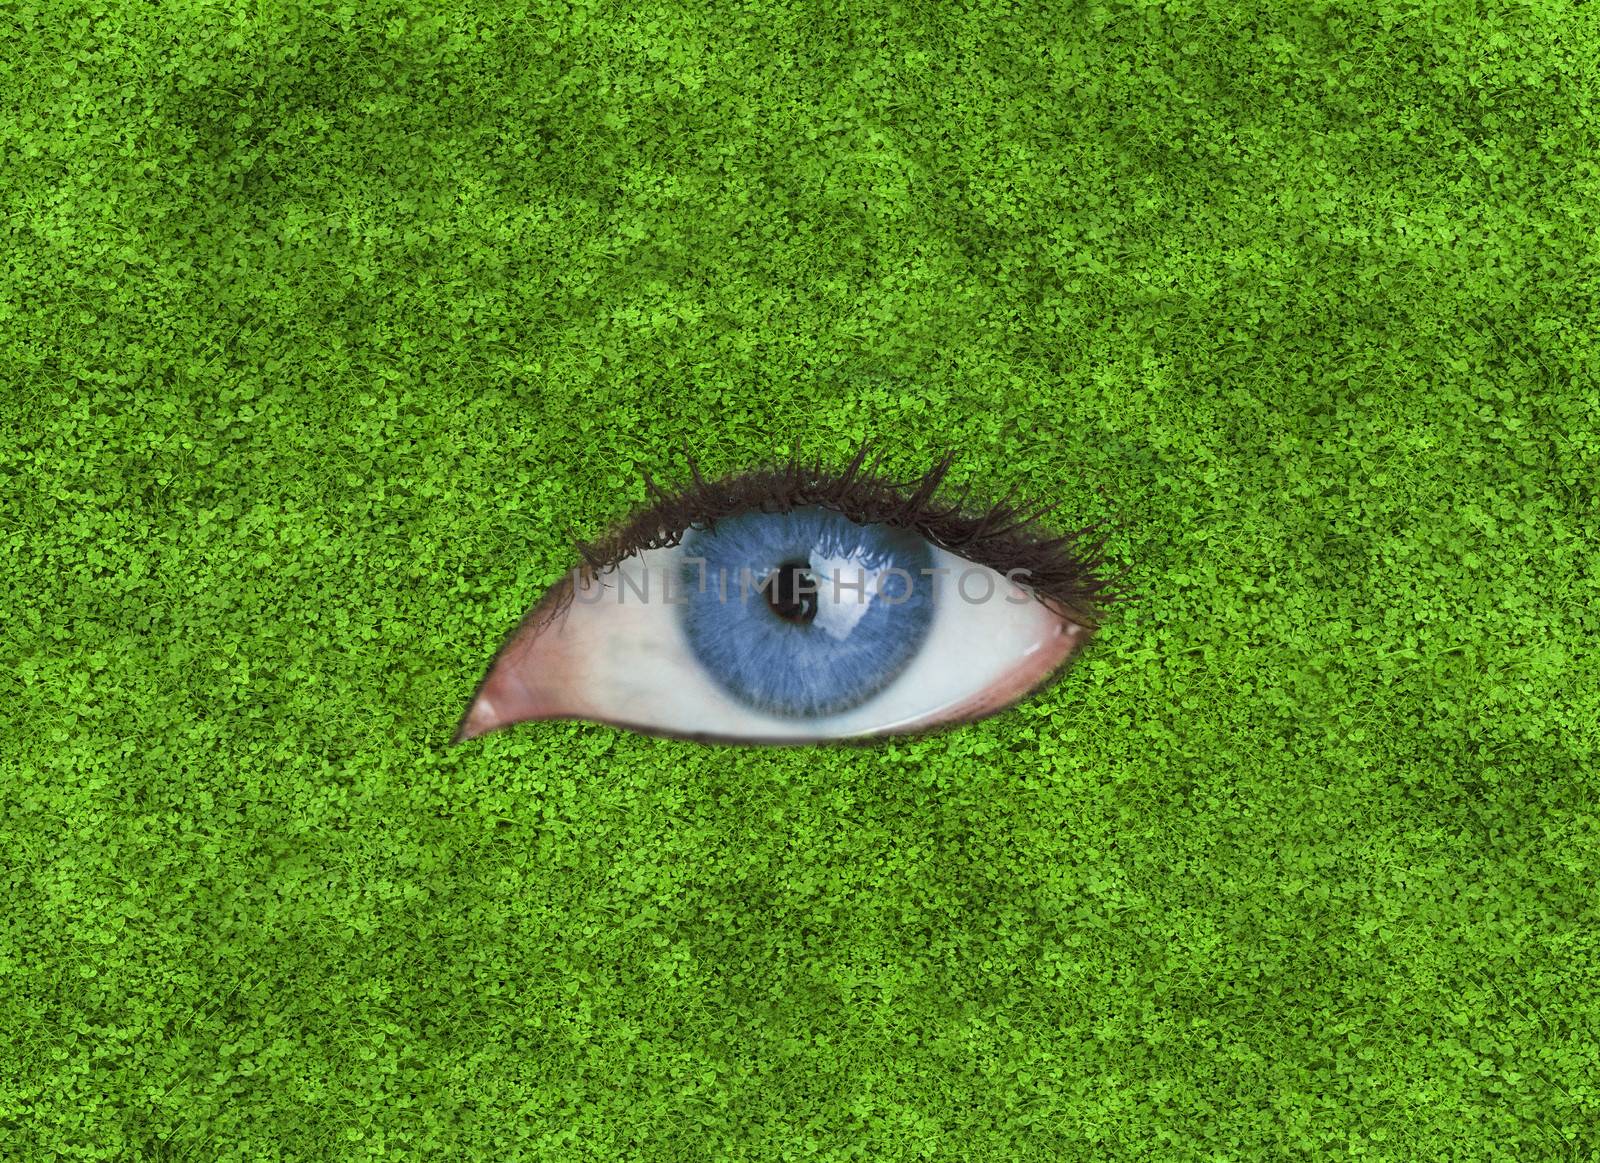 Blue eye in the middle of grass texture